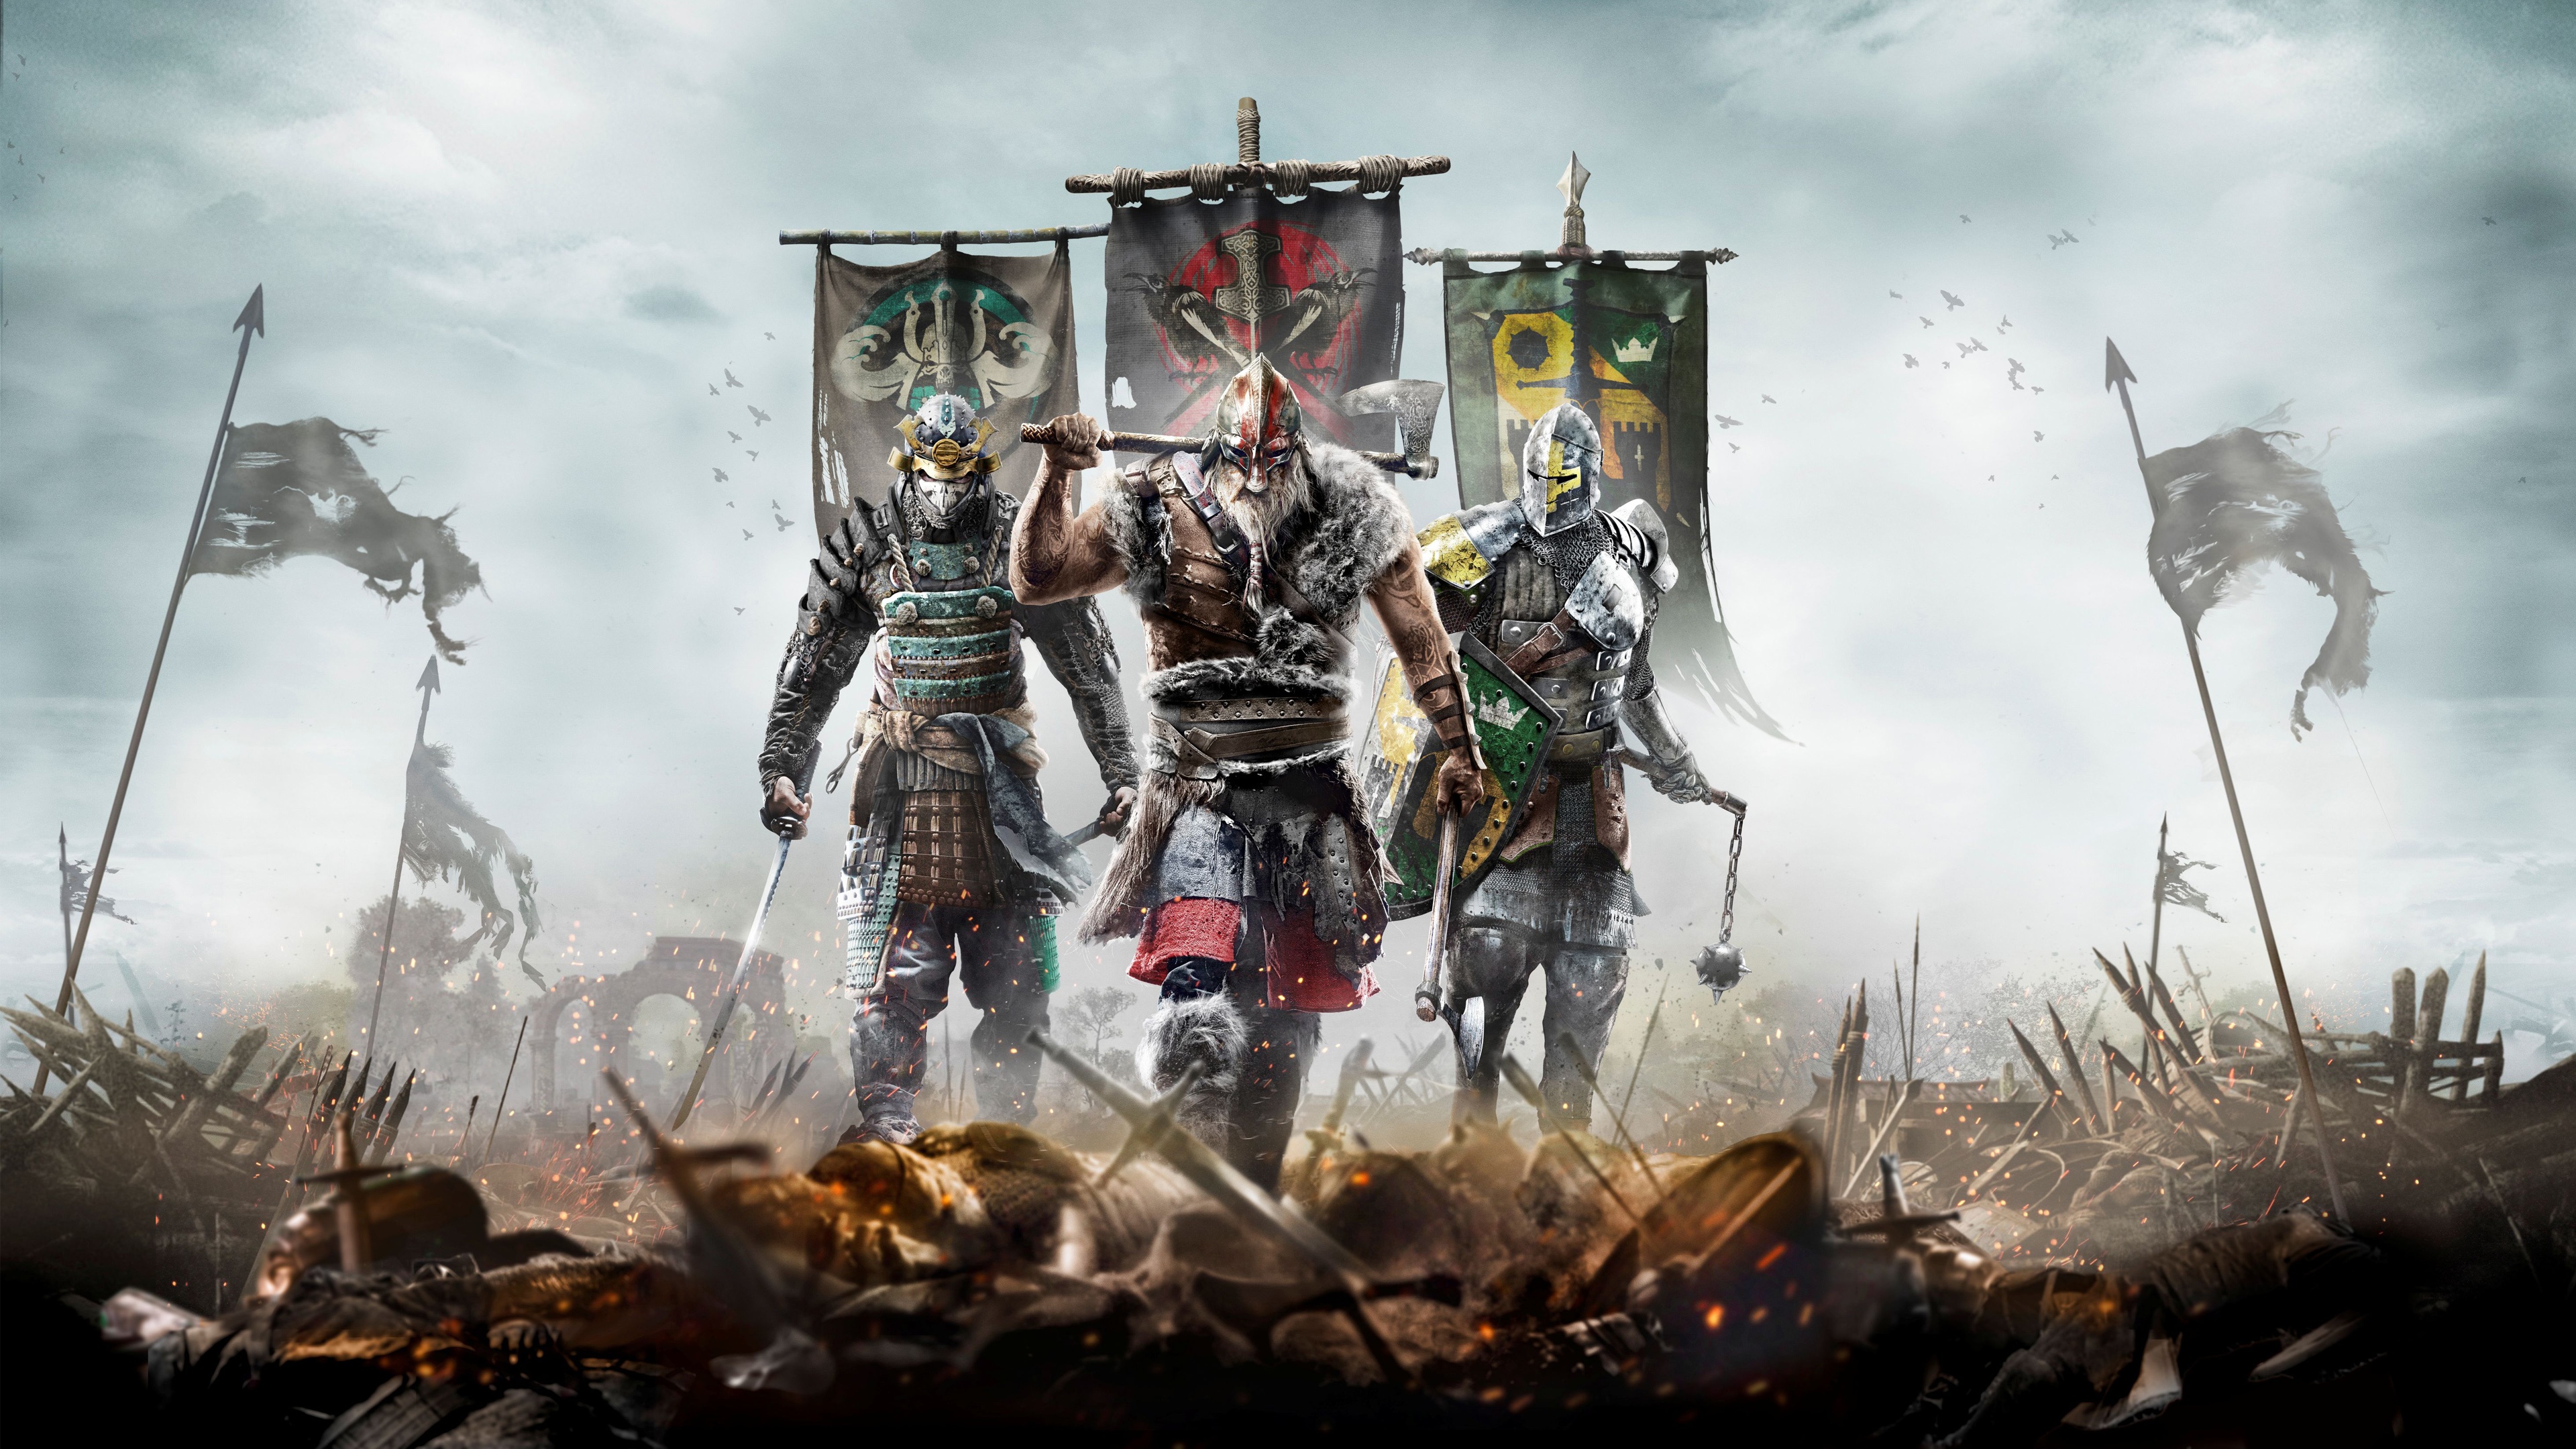 for honor 2016 game 3840 x 2160 27